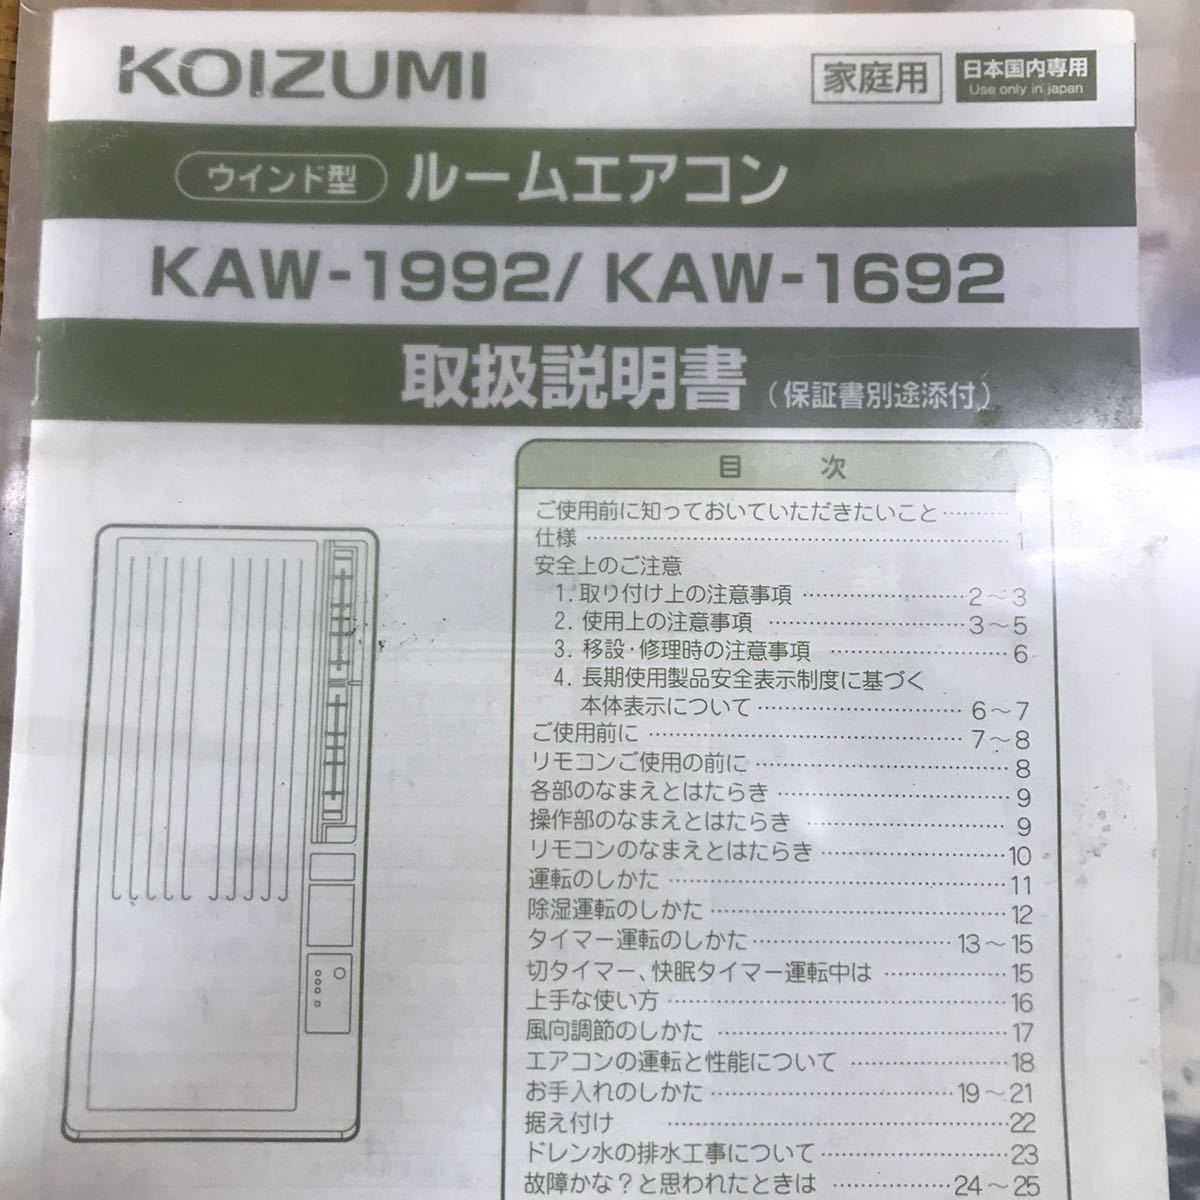 refle* electrification has confirmed KOIZUMI room air conditioner window shape cooling exclusive use KAW-1692 2019 year made remote control attaching actual place pickup warm welcome!